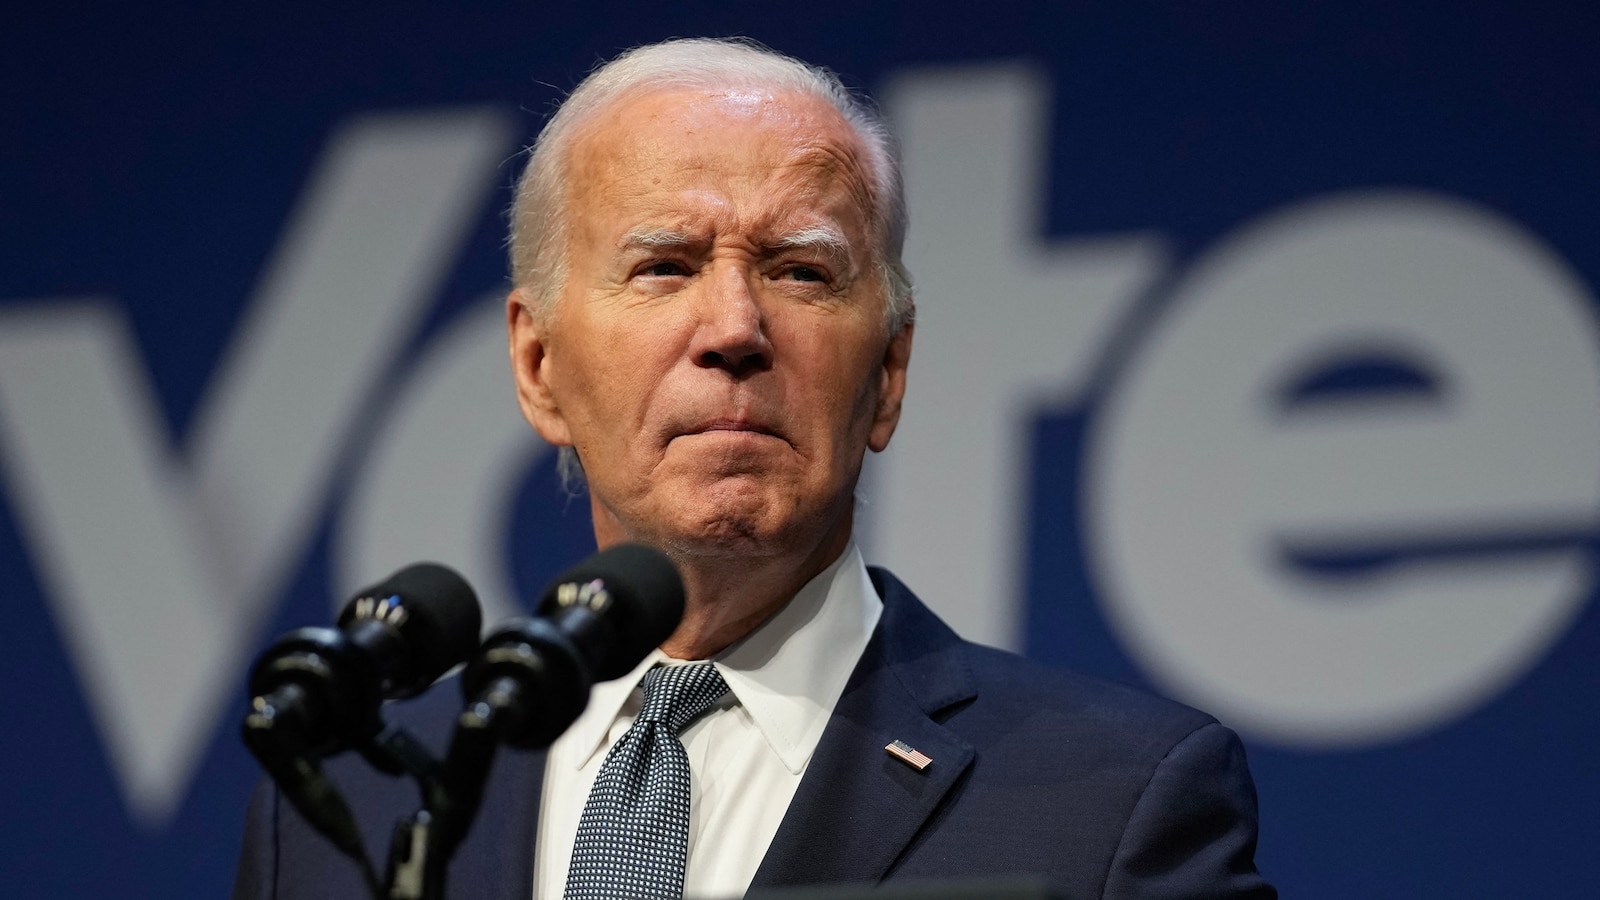 Biden, 'stuck at home with COVID,' dissects Trump's RNC speech: 'What the hell was he talking about?'